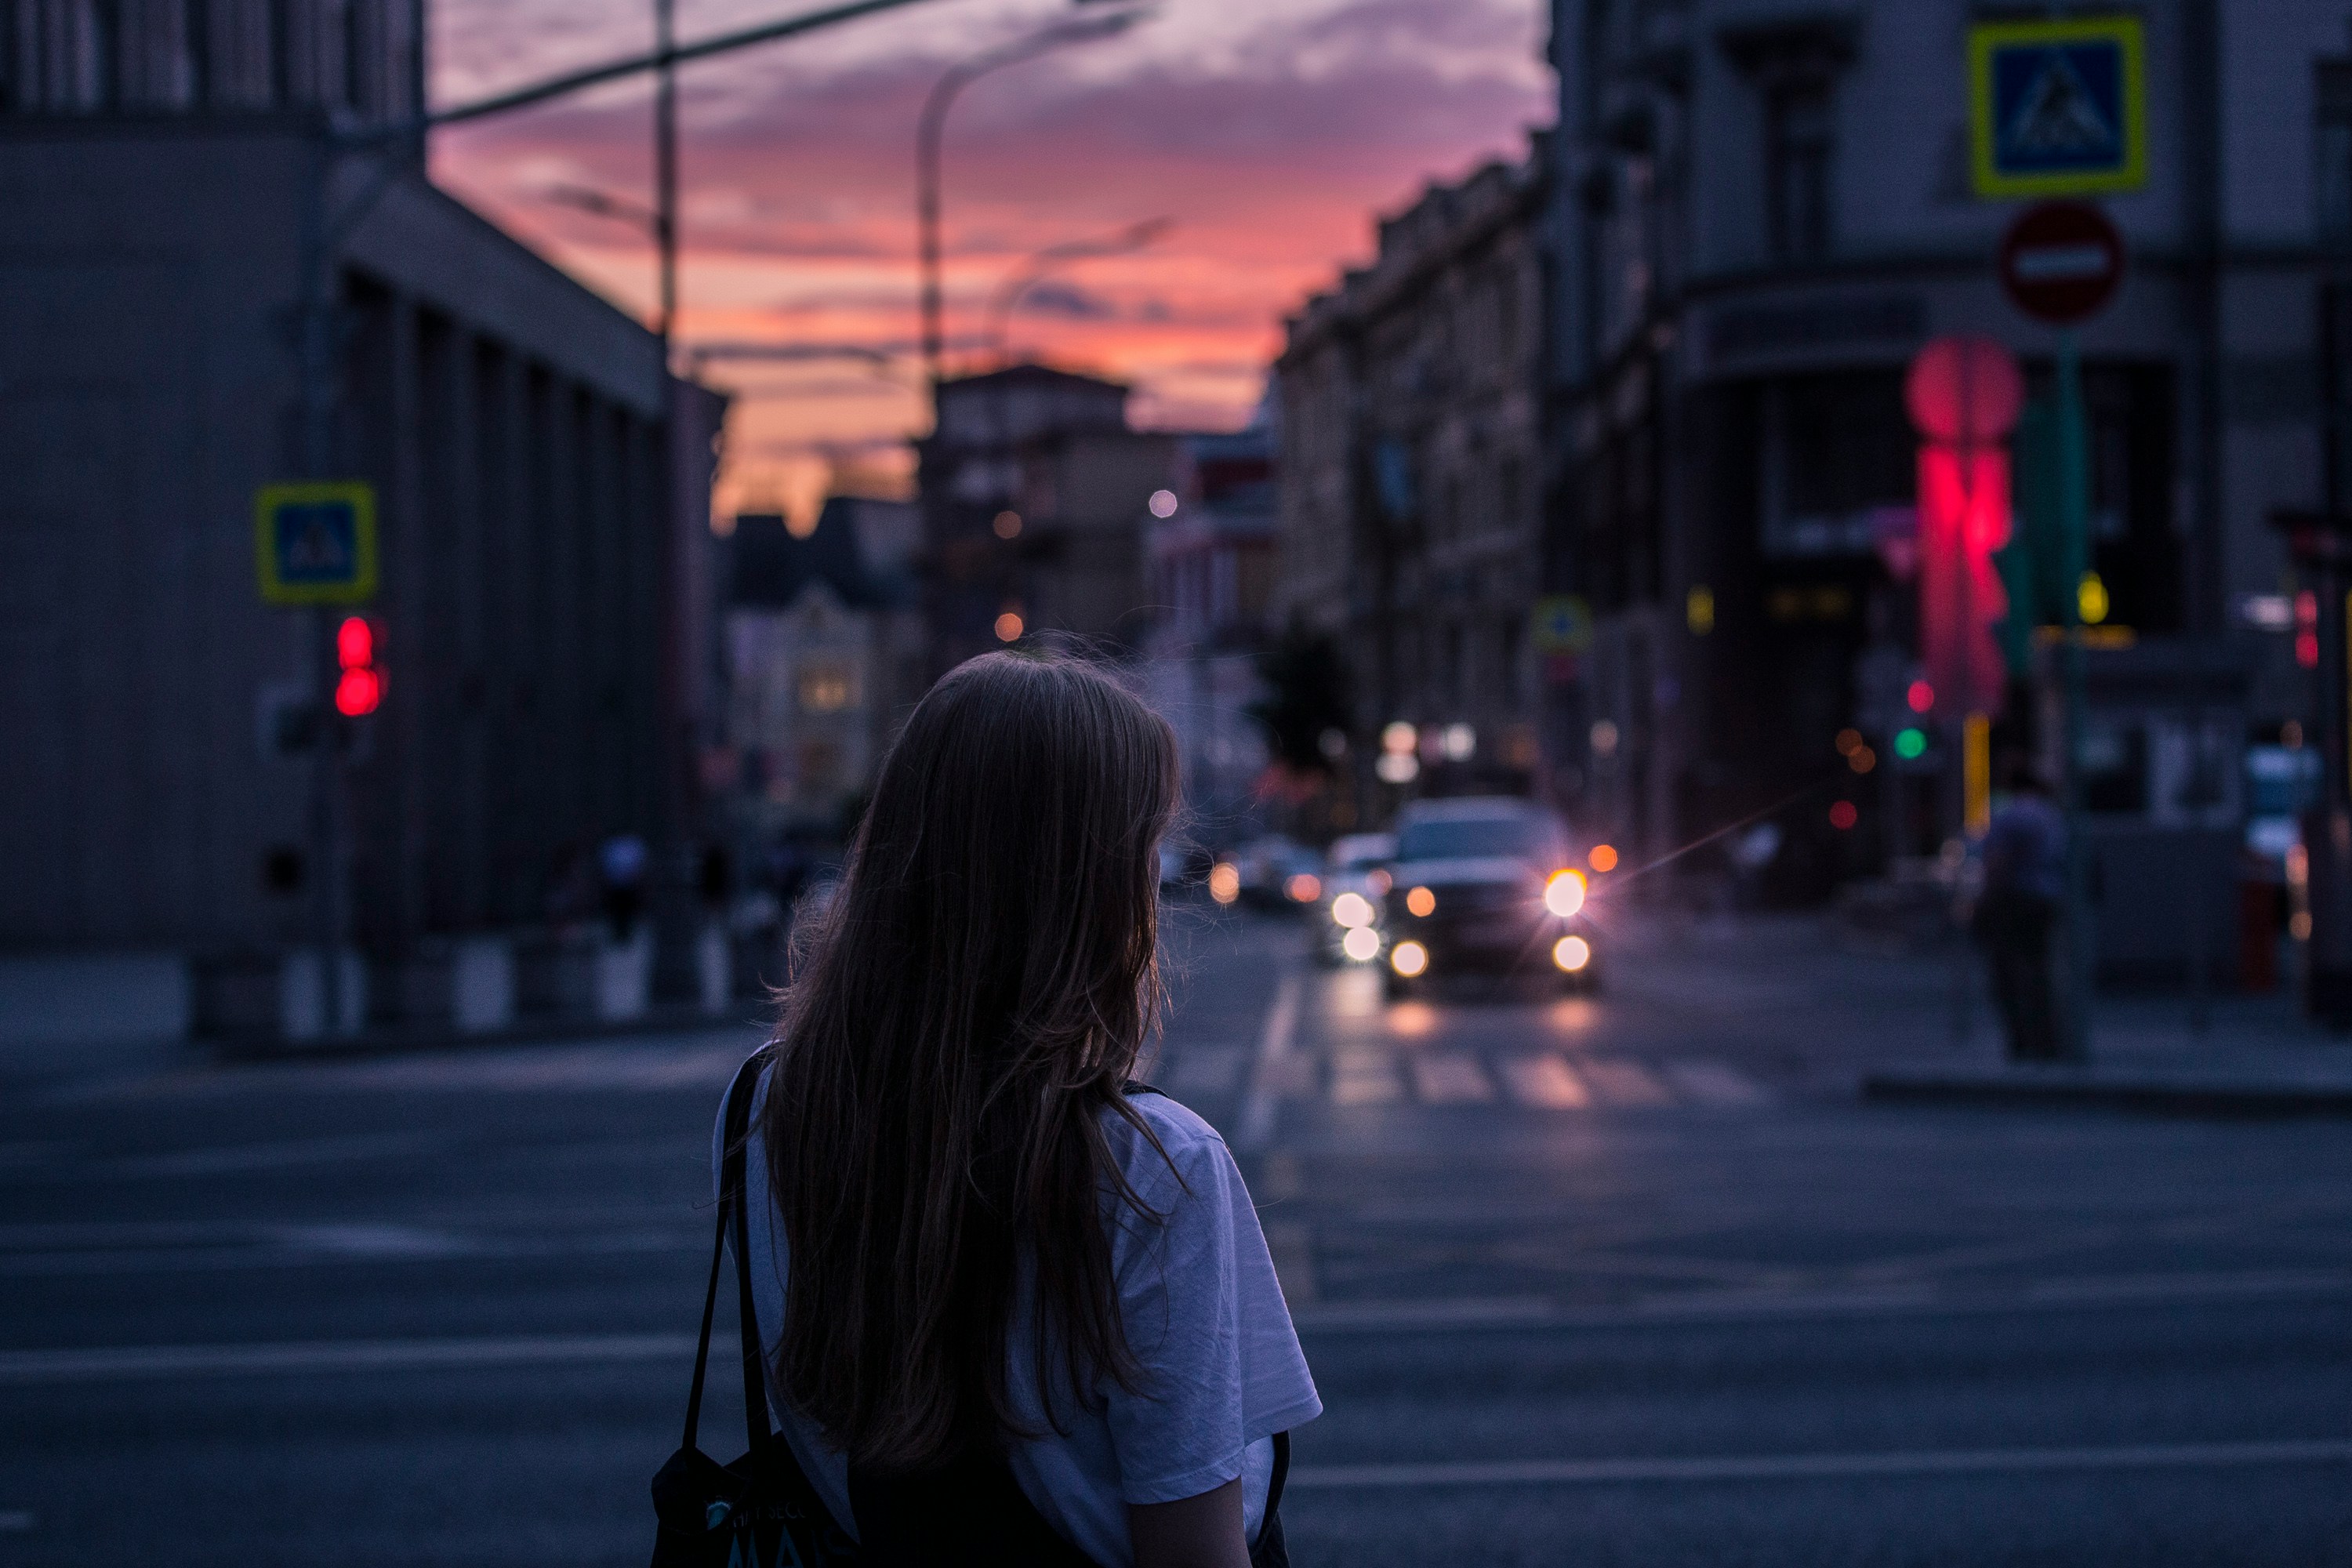 A woman on the street at night | Source: Unsplash